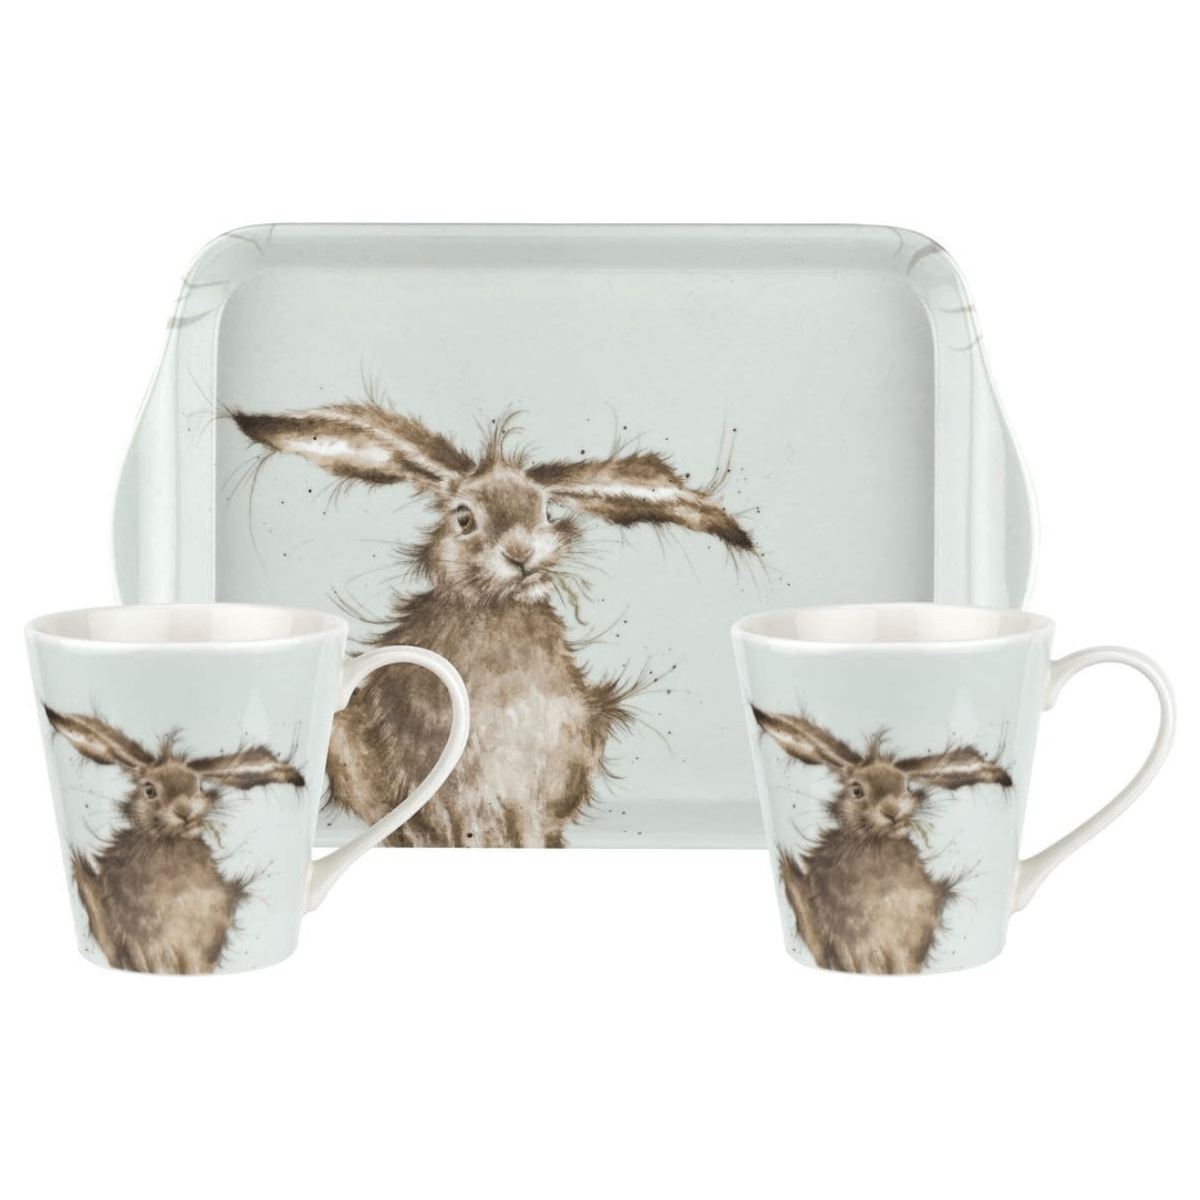 Wrendale Designs Kitchen Accessories Hare Design Mug and Tray Gift Set